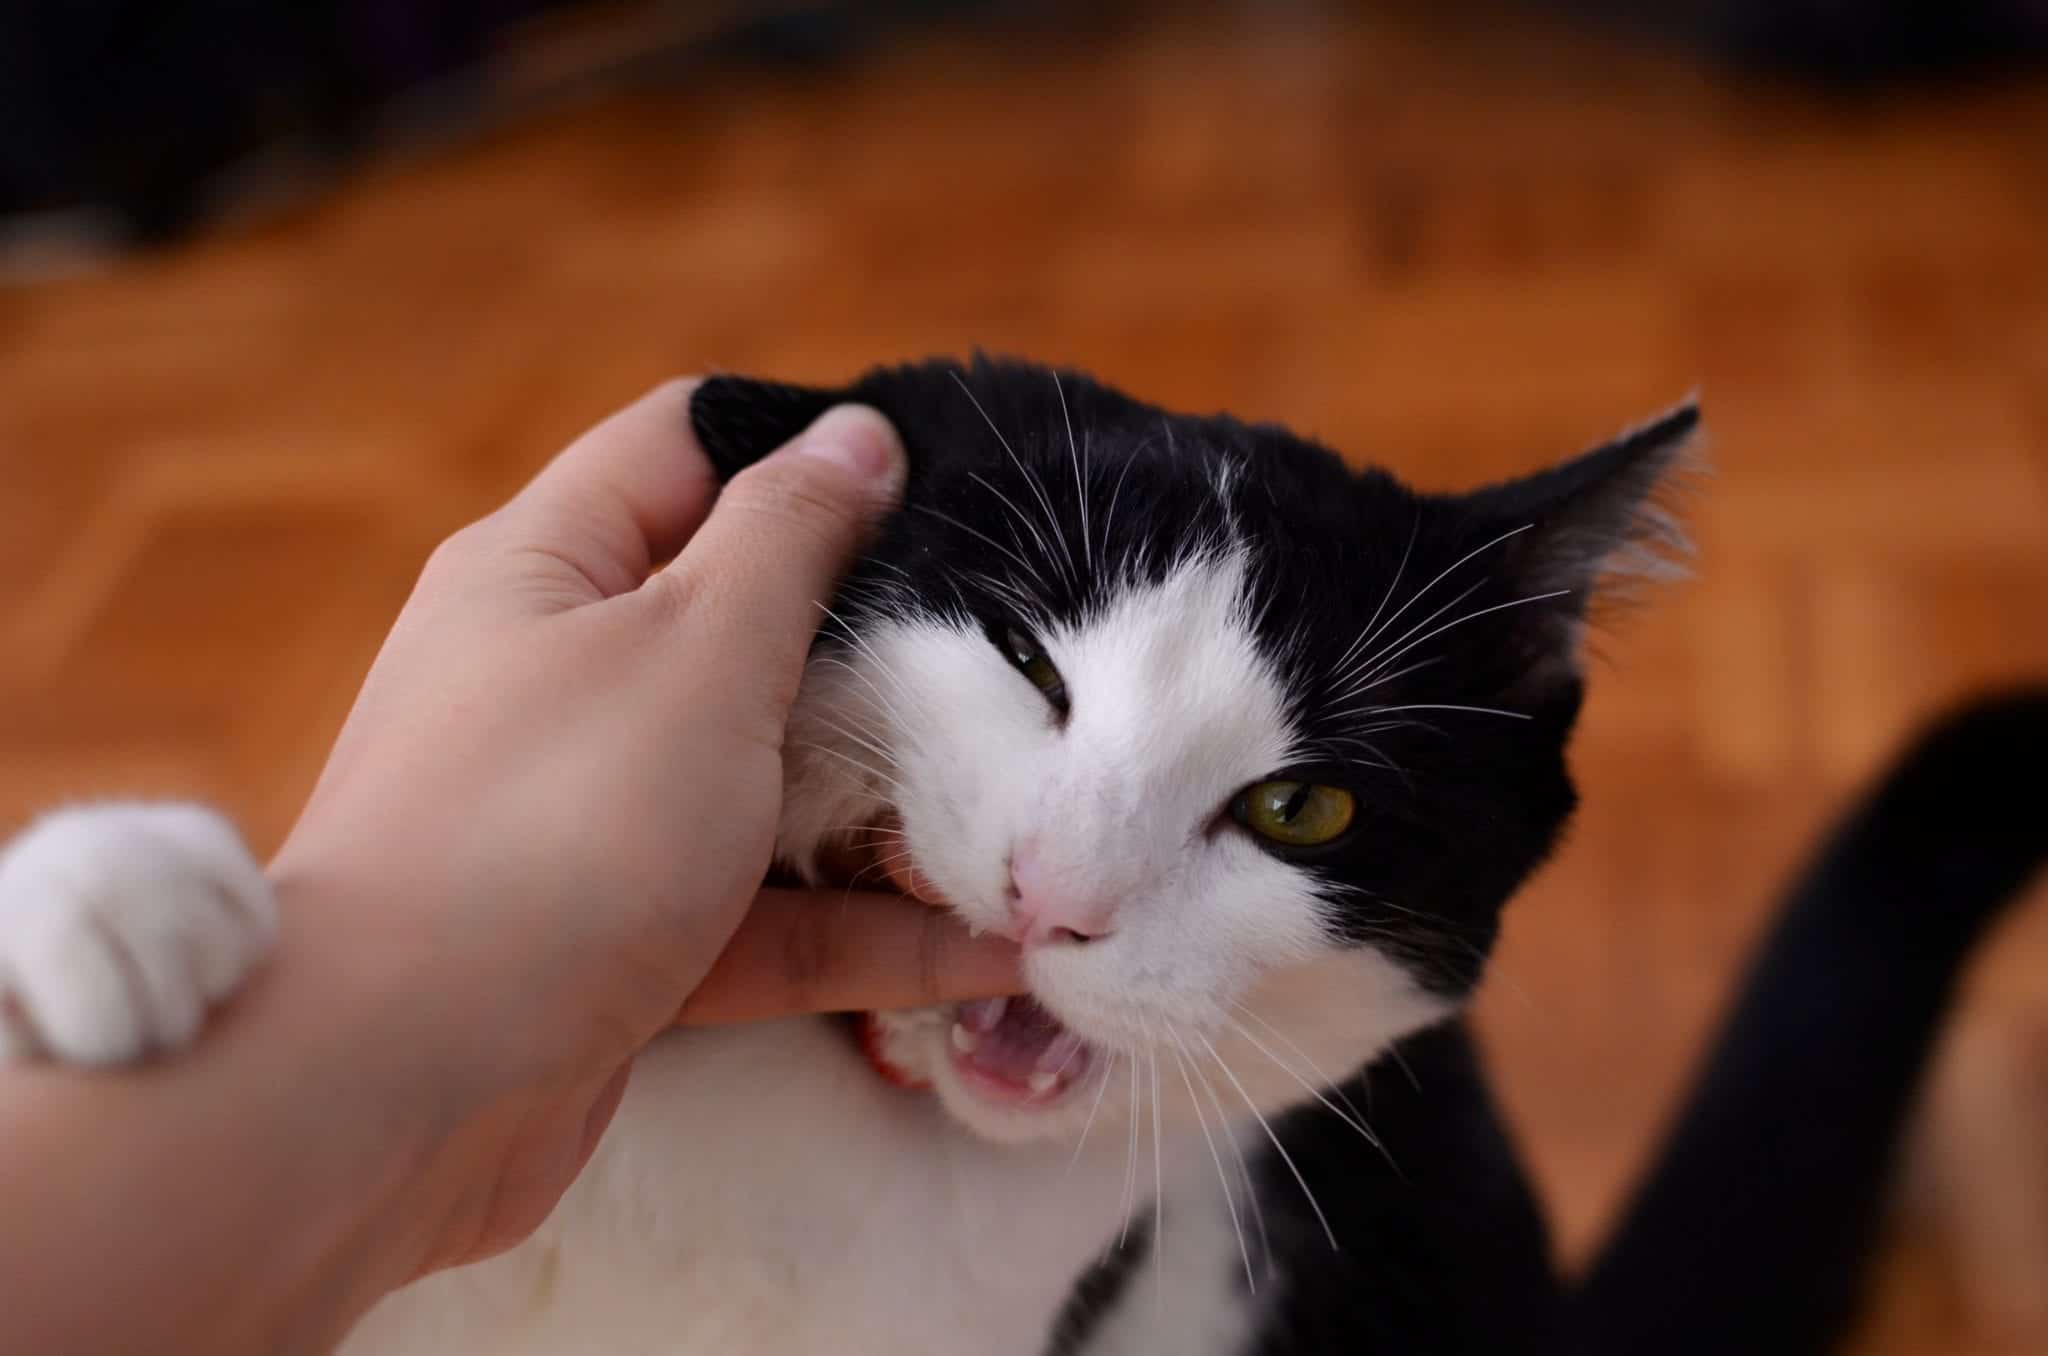 Why does my cat bite me